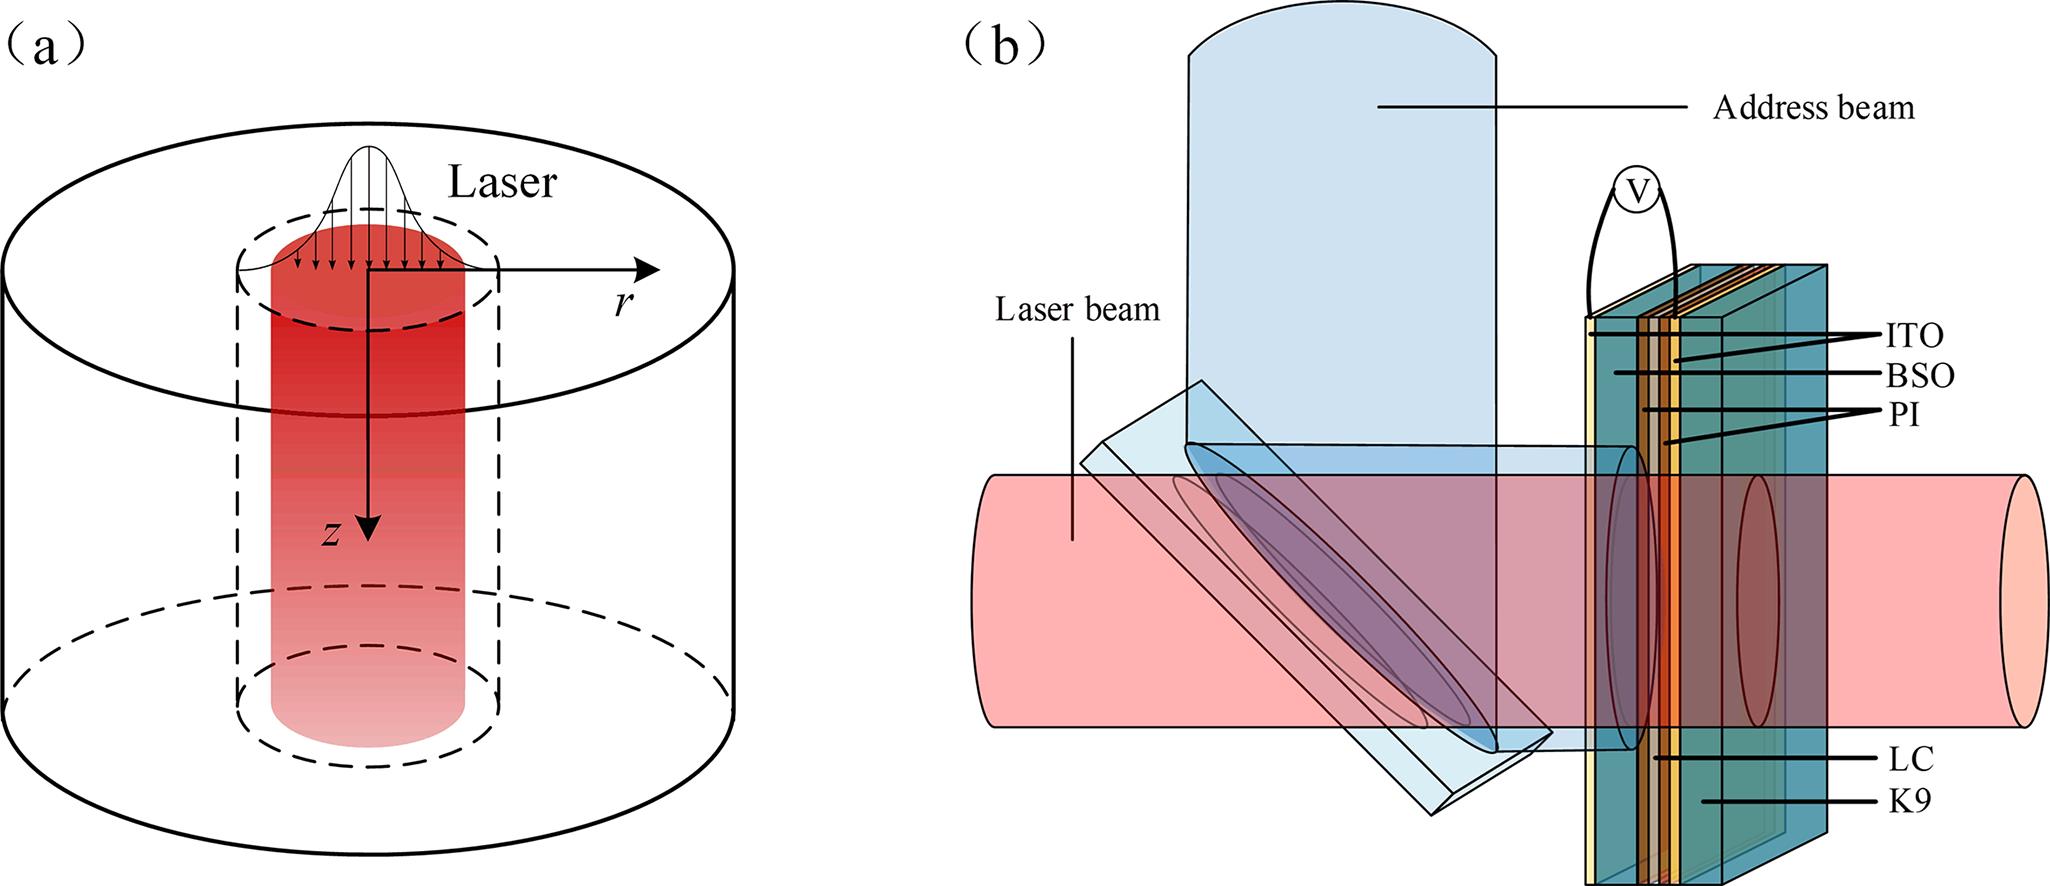 (a) Heat transfer equation model. (b) Structure diagram of a laser-irradiated OASLM.